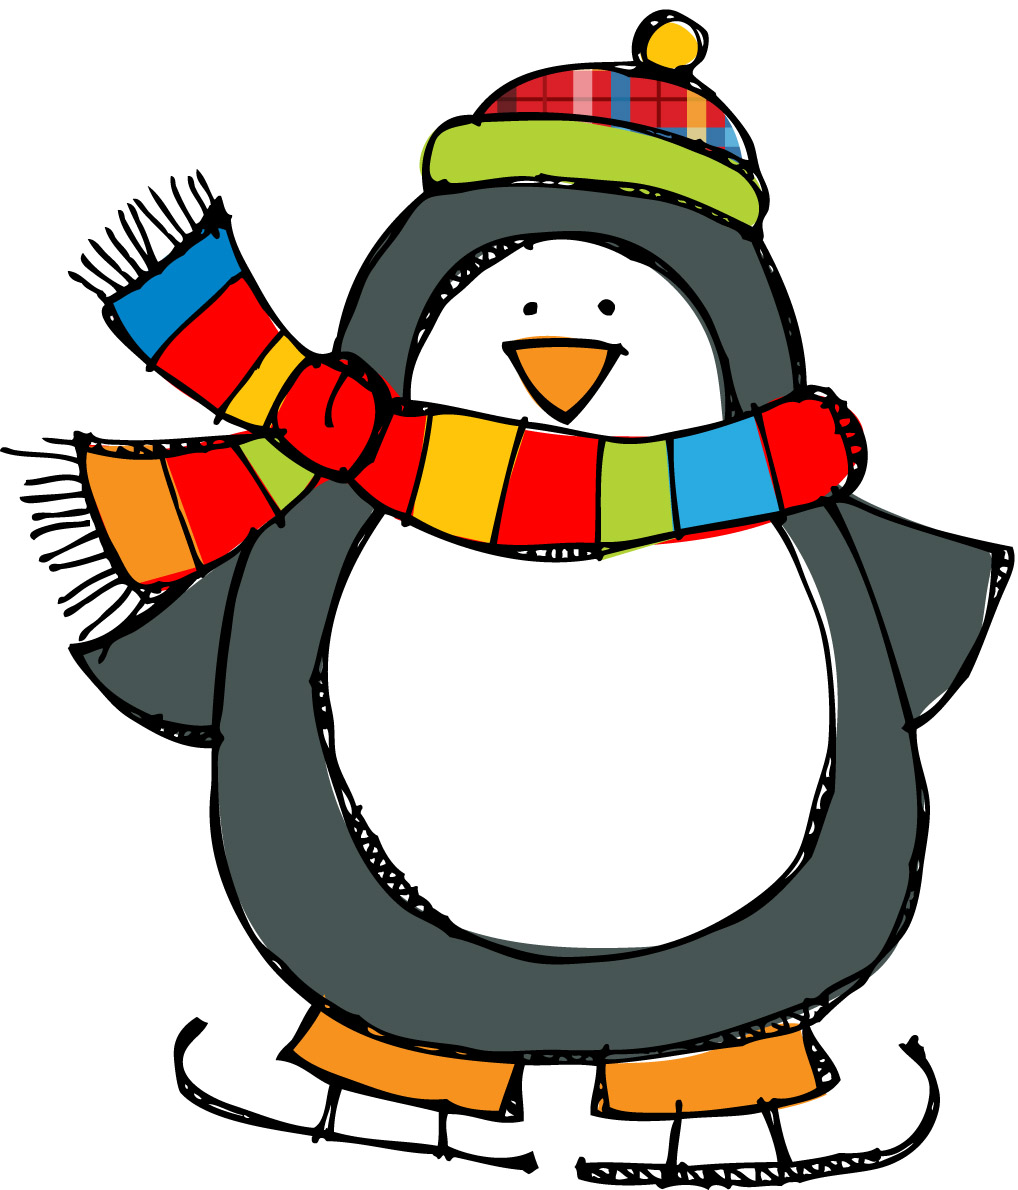 January clipart free download clip art on 2 - Clipartix